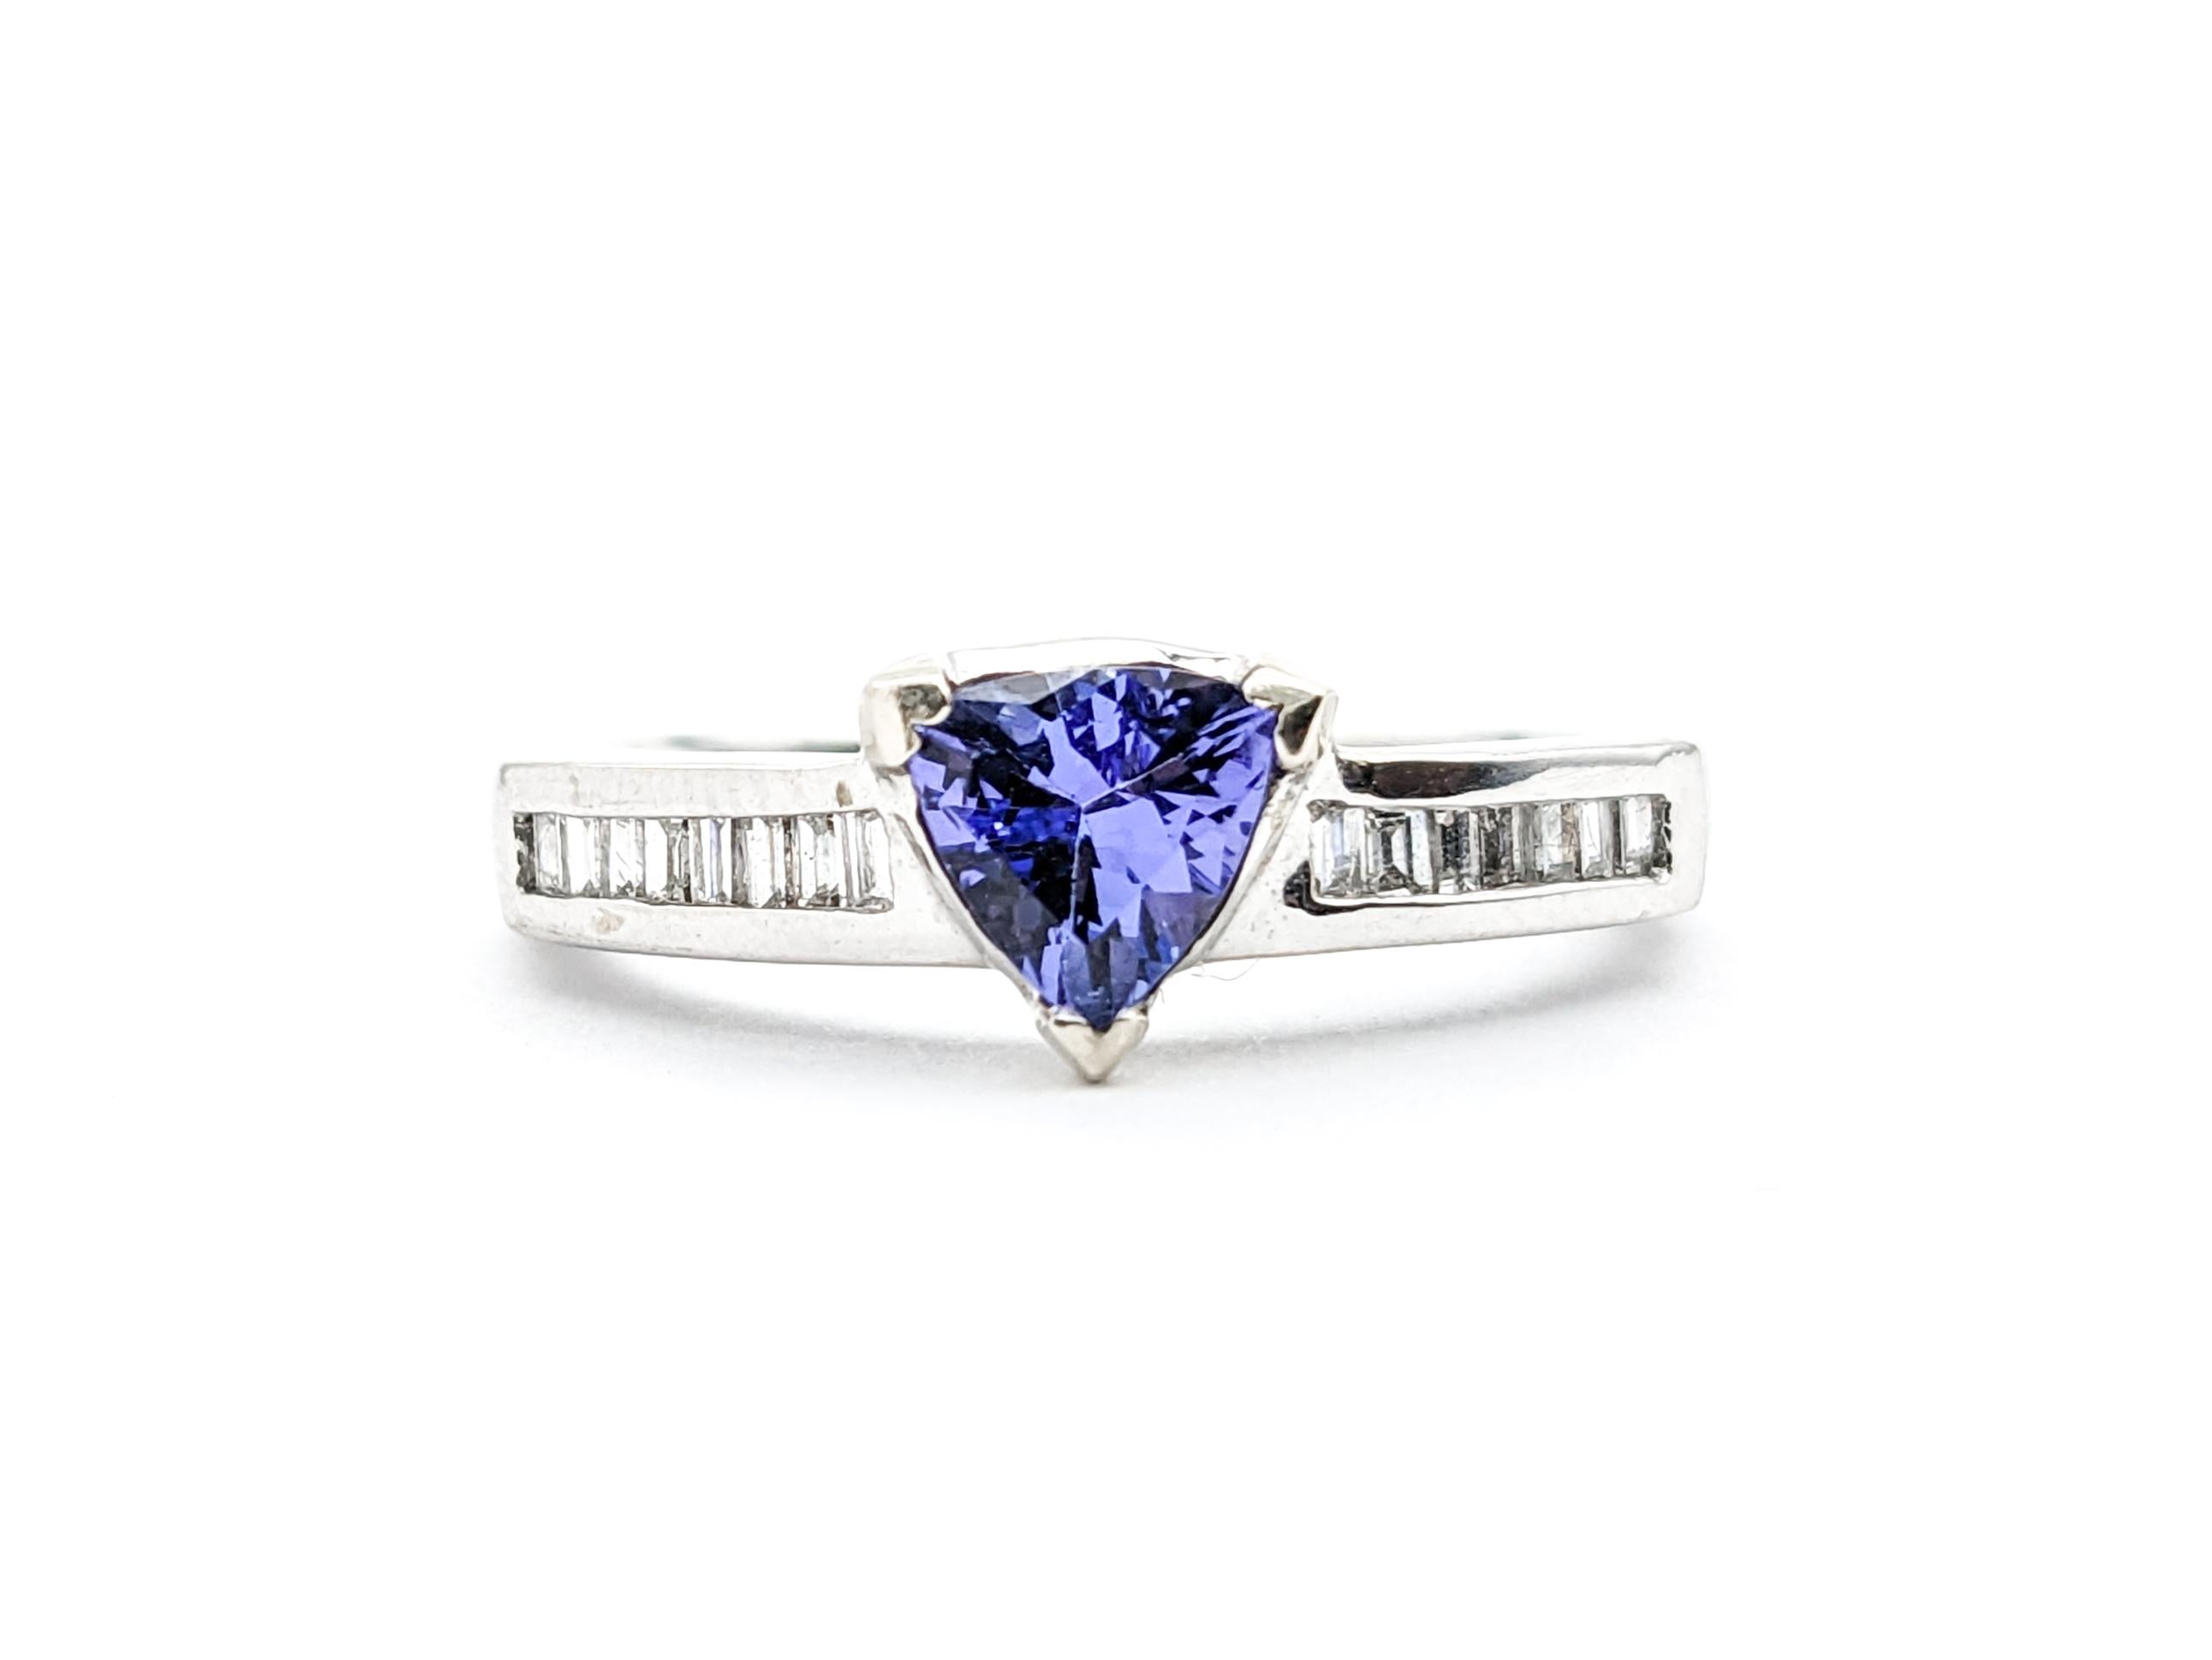 .75ct Blue Tanzanite & Diamonds Ring In White Gold

Discover the elegance of this stunning Tanzanite ring, meticulously fashioned from 14k White Gold. Central to its allure is a mesmerizing .75ct tanzanite with a rich blue-violet hue. Further